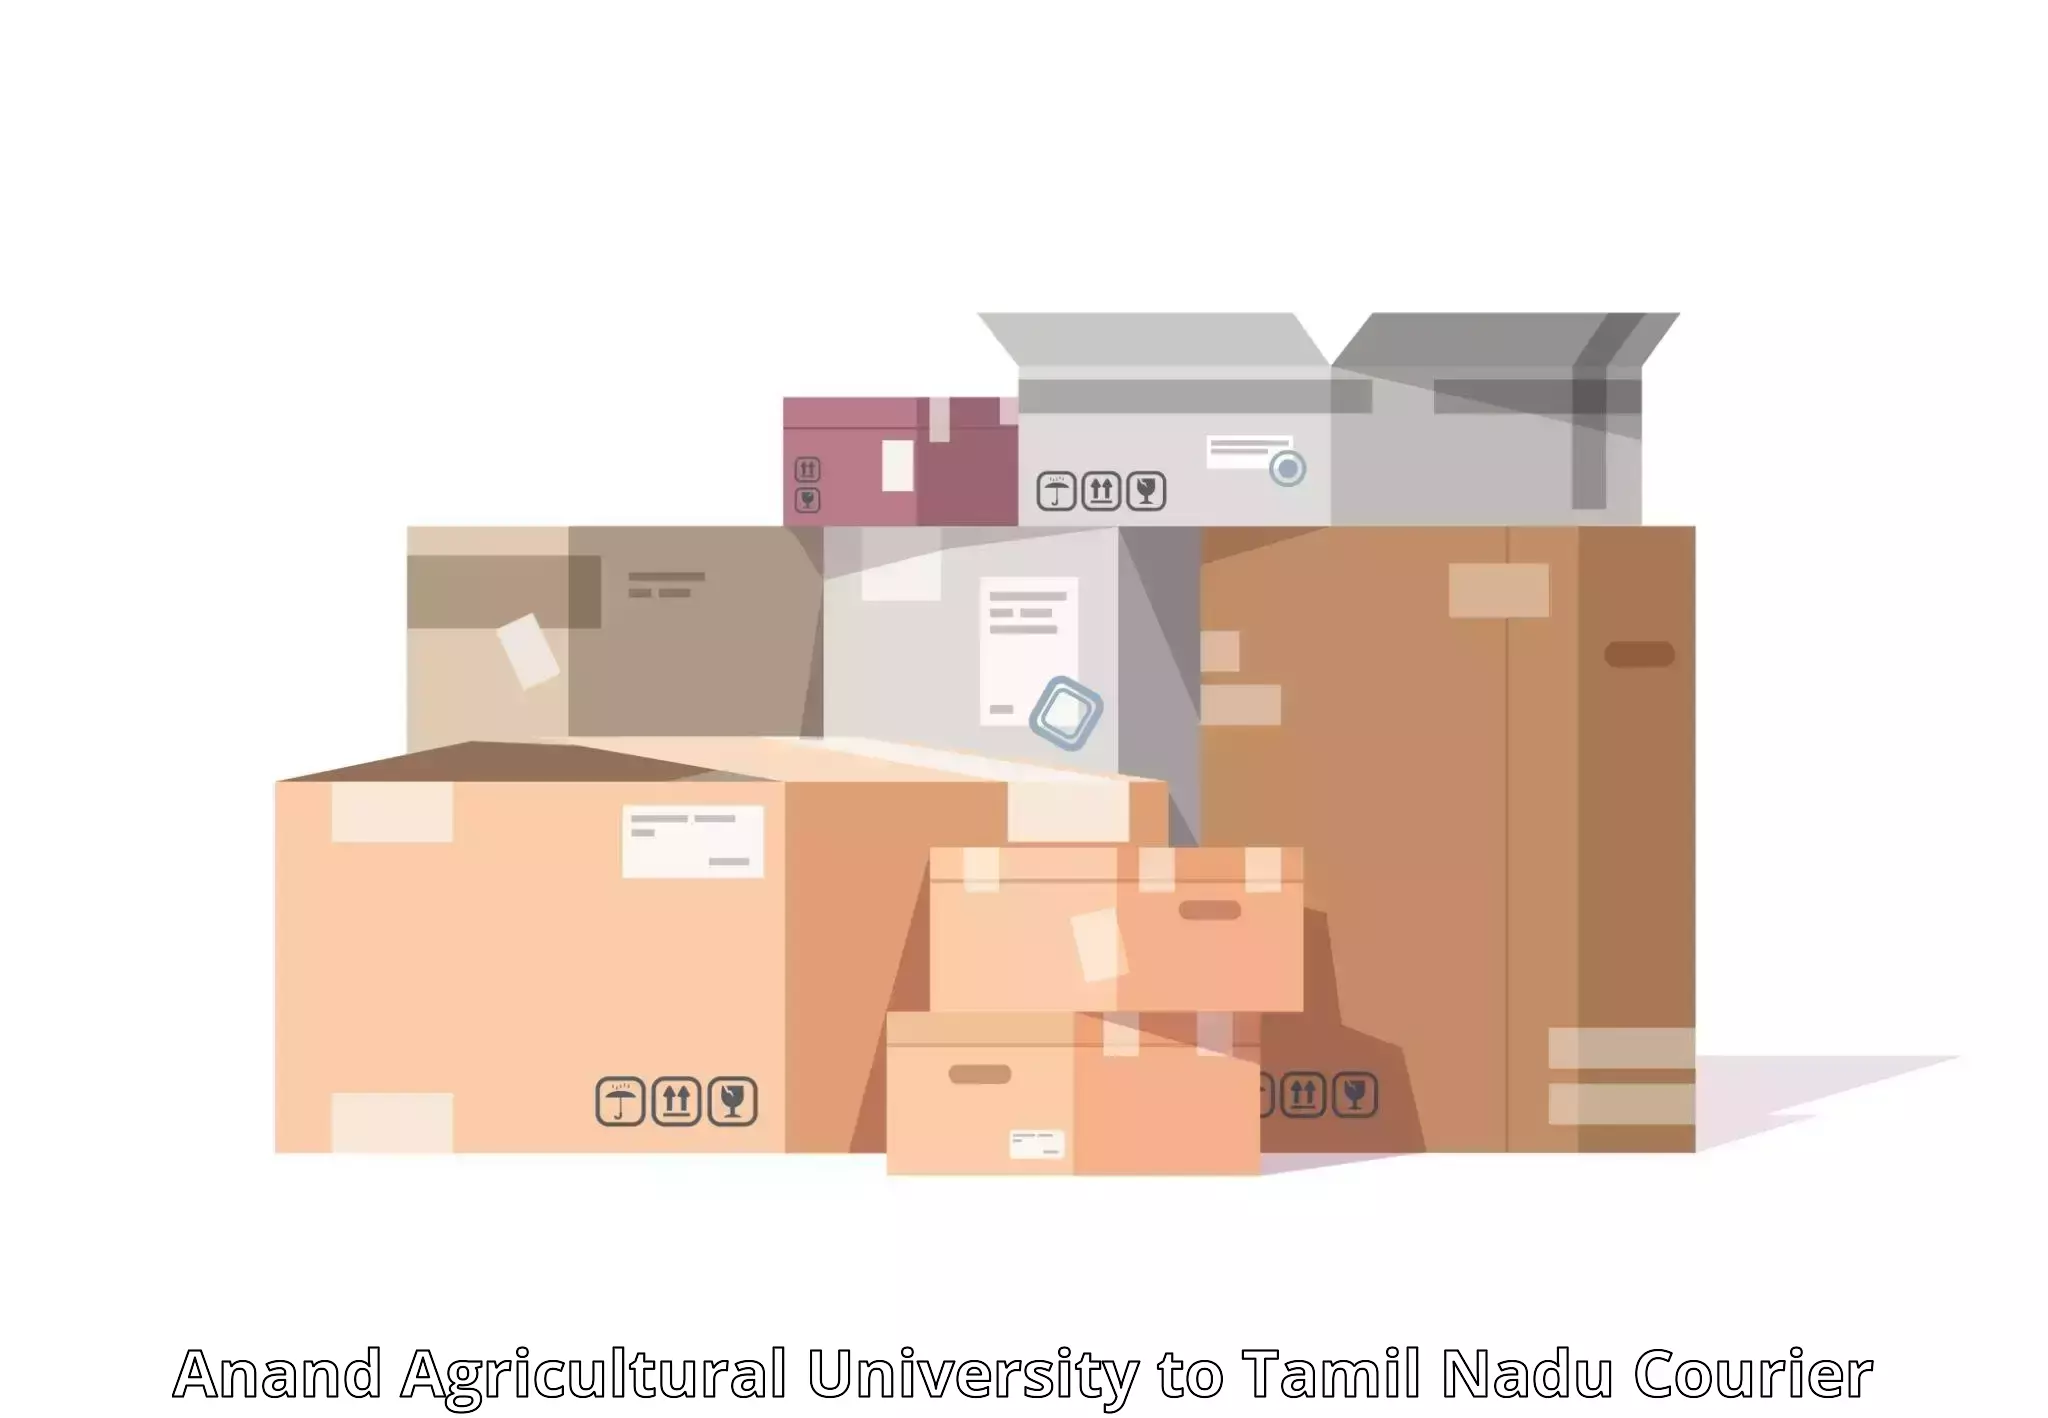 Efficient cargo services Anand Agricultural University to Tamil Nadu Agricultural University Coimbatore